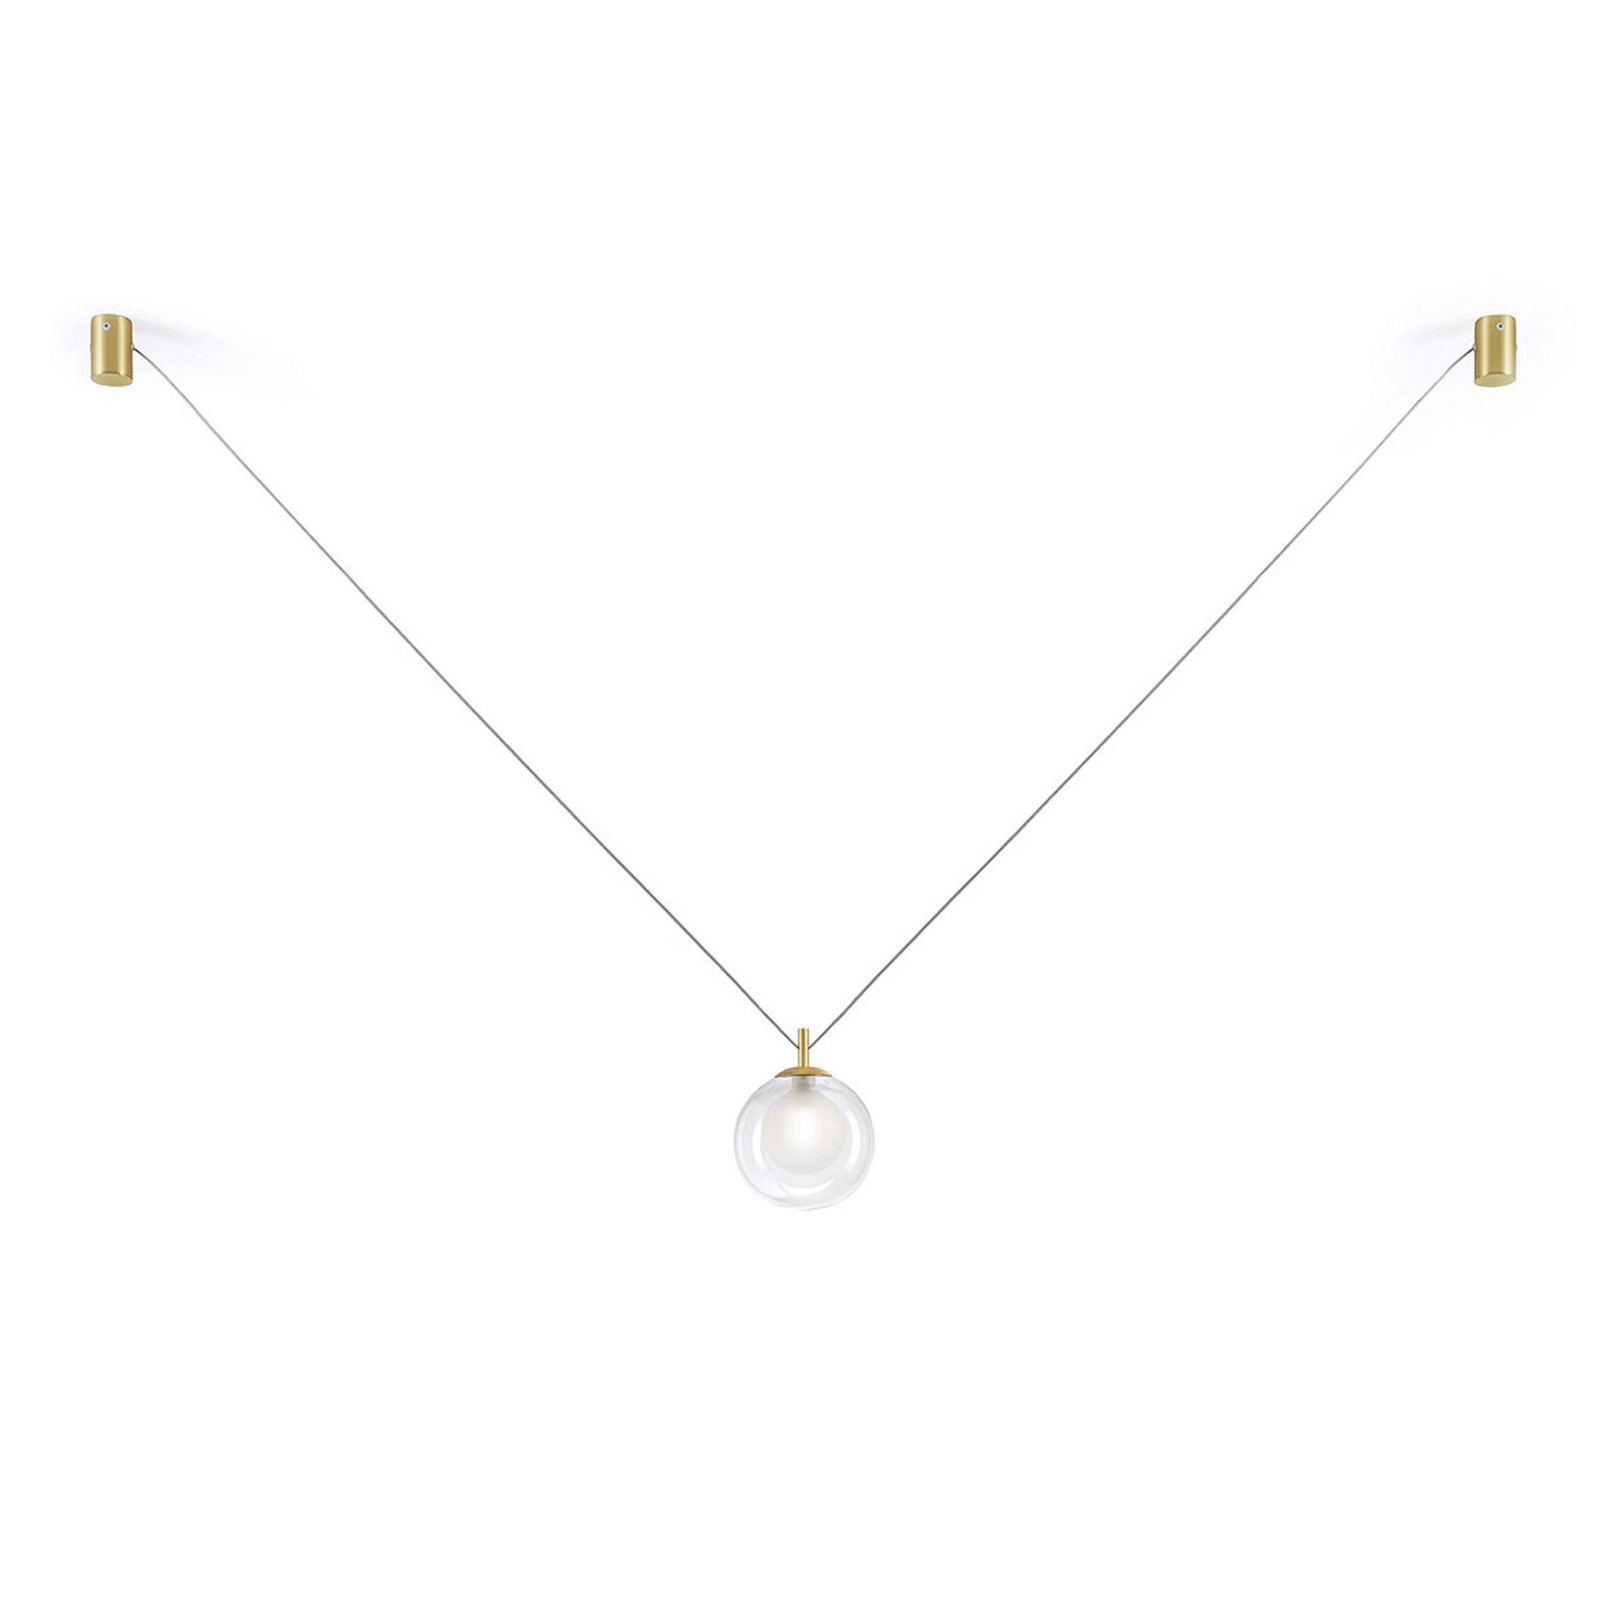 Aladino pendant light with variable suspension system 1-bulb